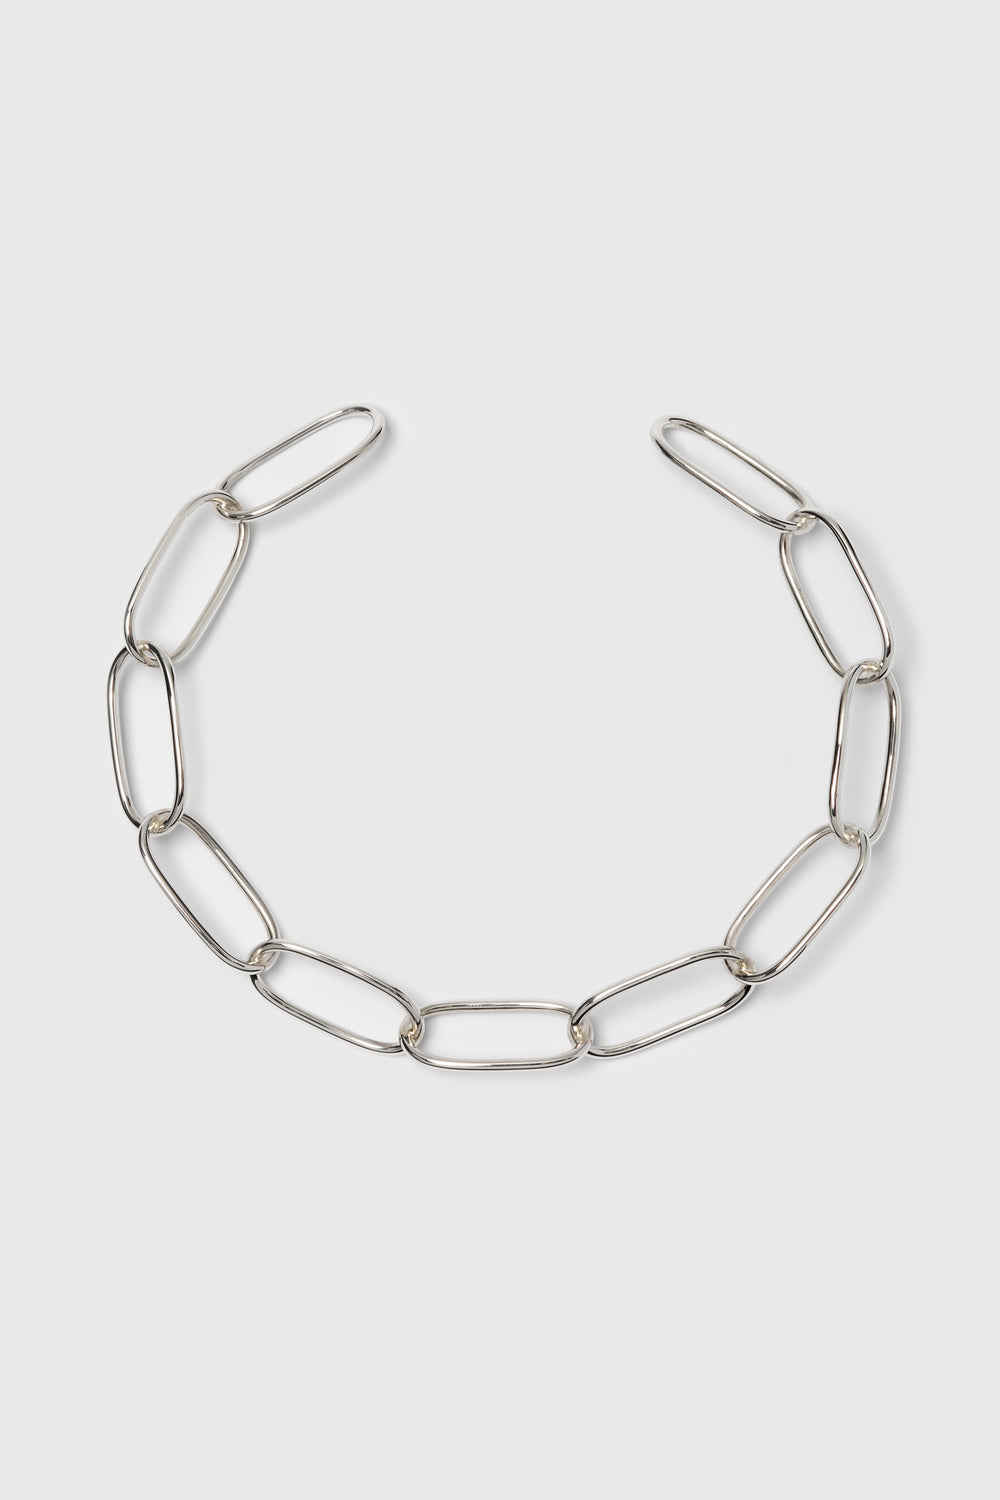 Statement neckpiece made from bold link chains with a high gloss finish. Silver jewelry handmade in Berlin.